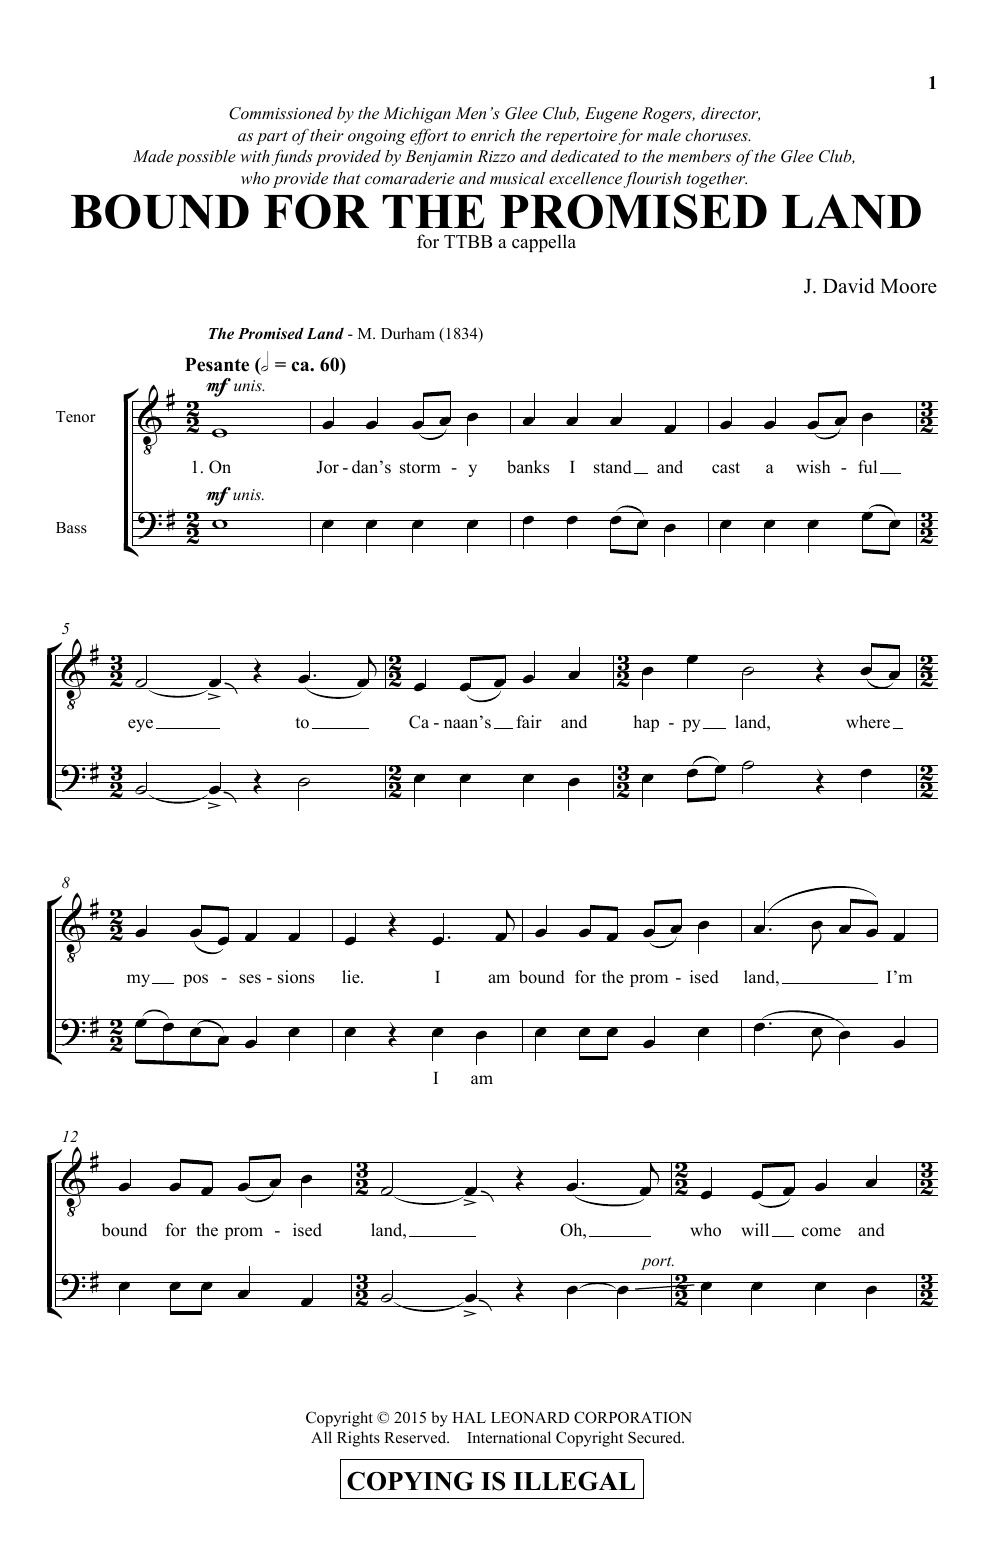 Download J. David Moore Bound For The Promised Land Sheet Music